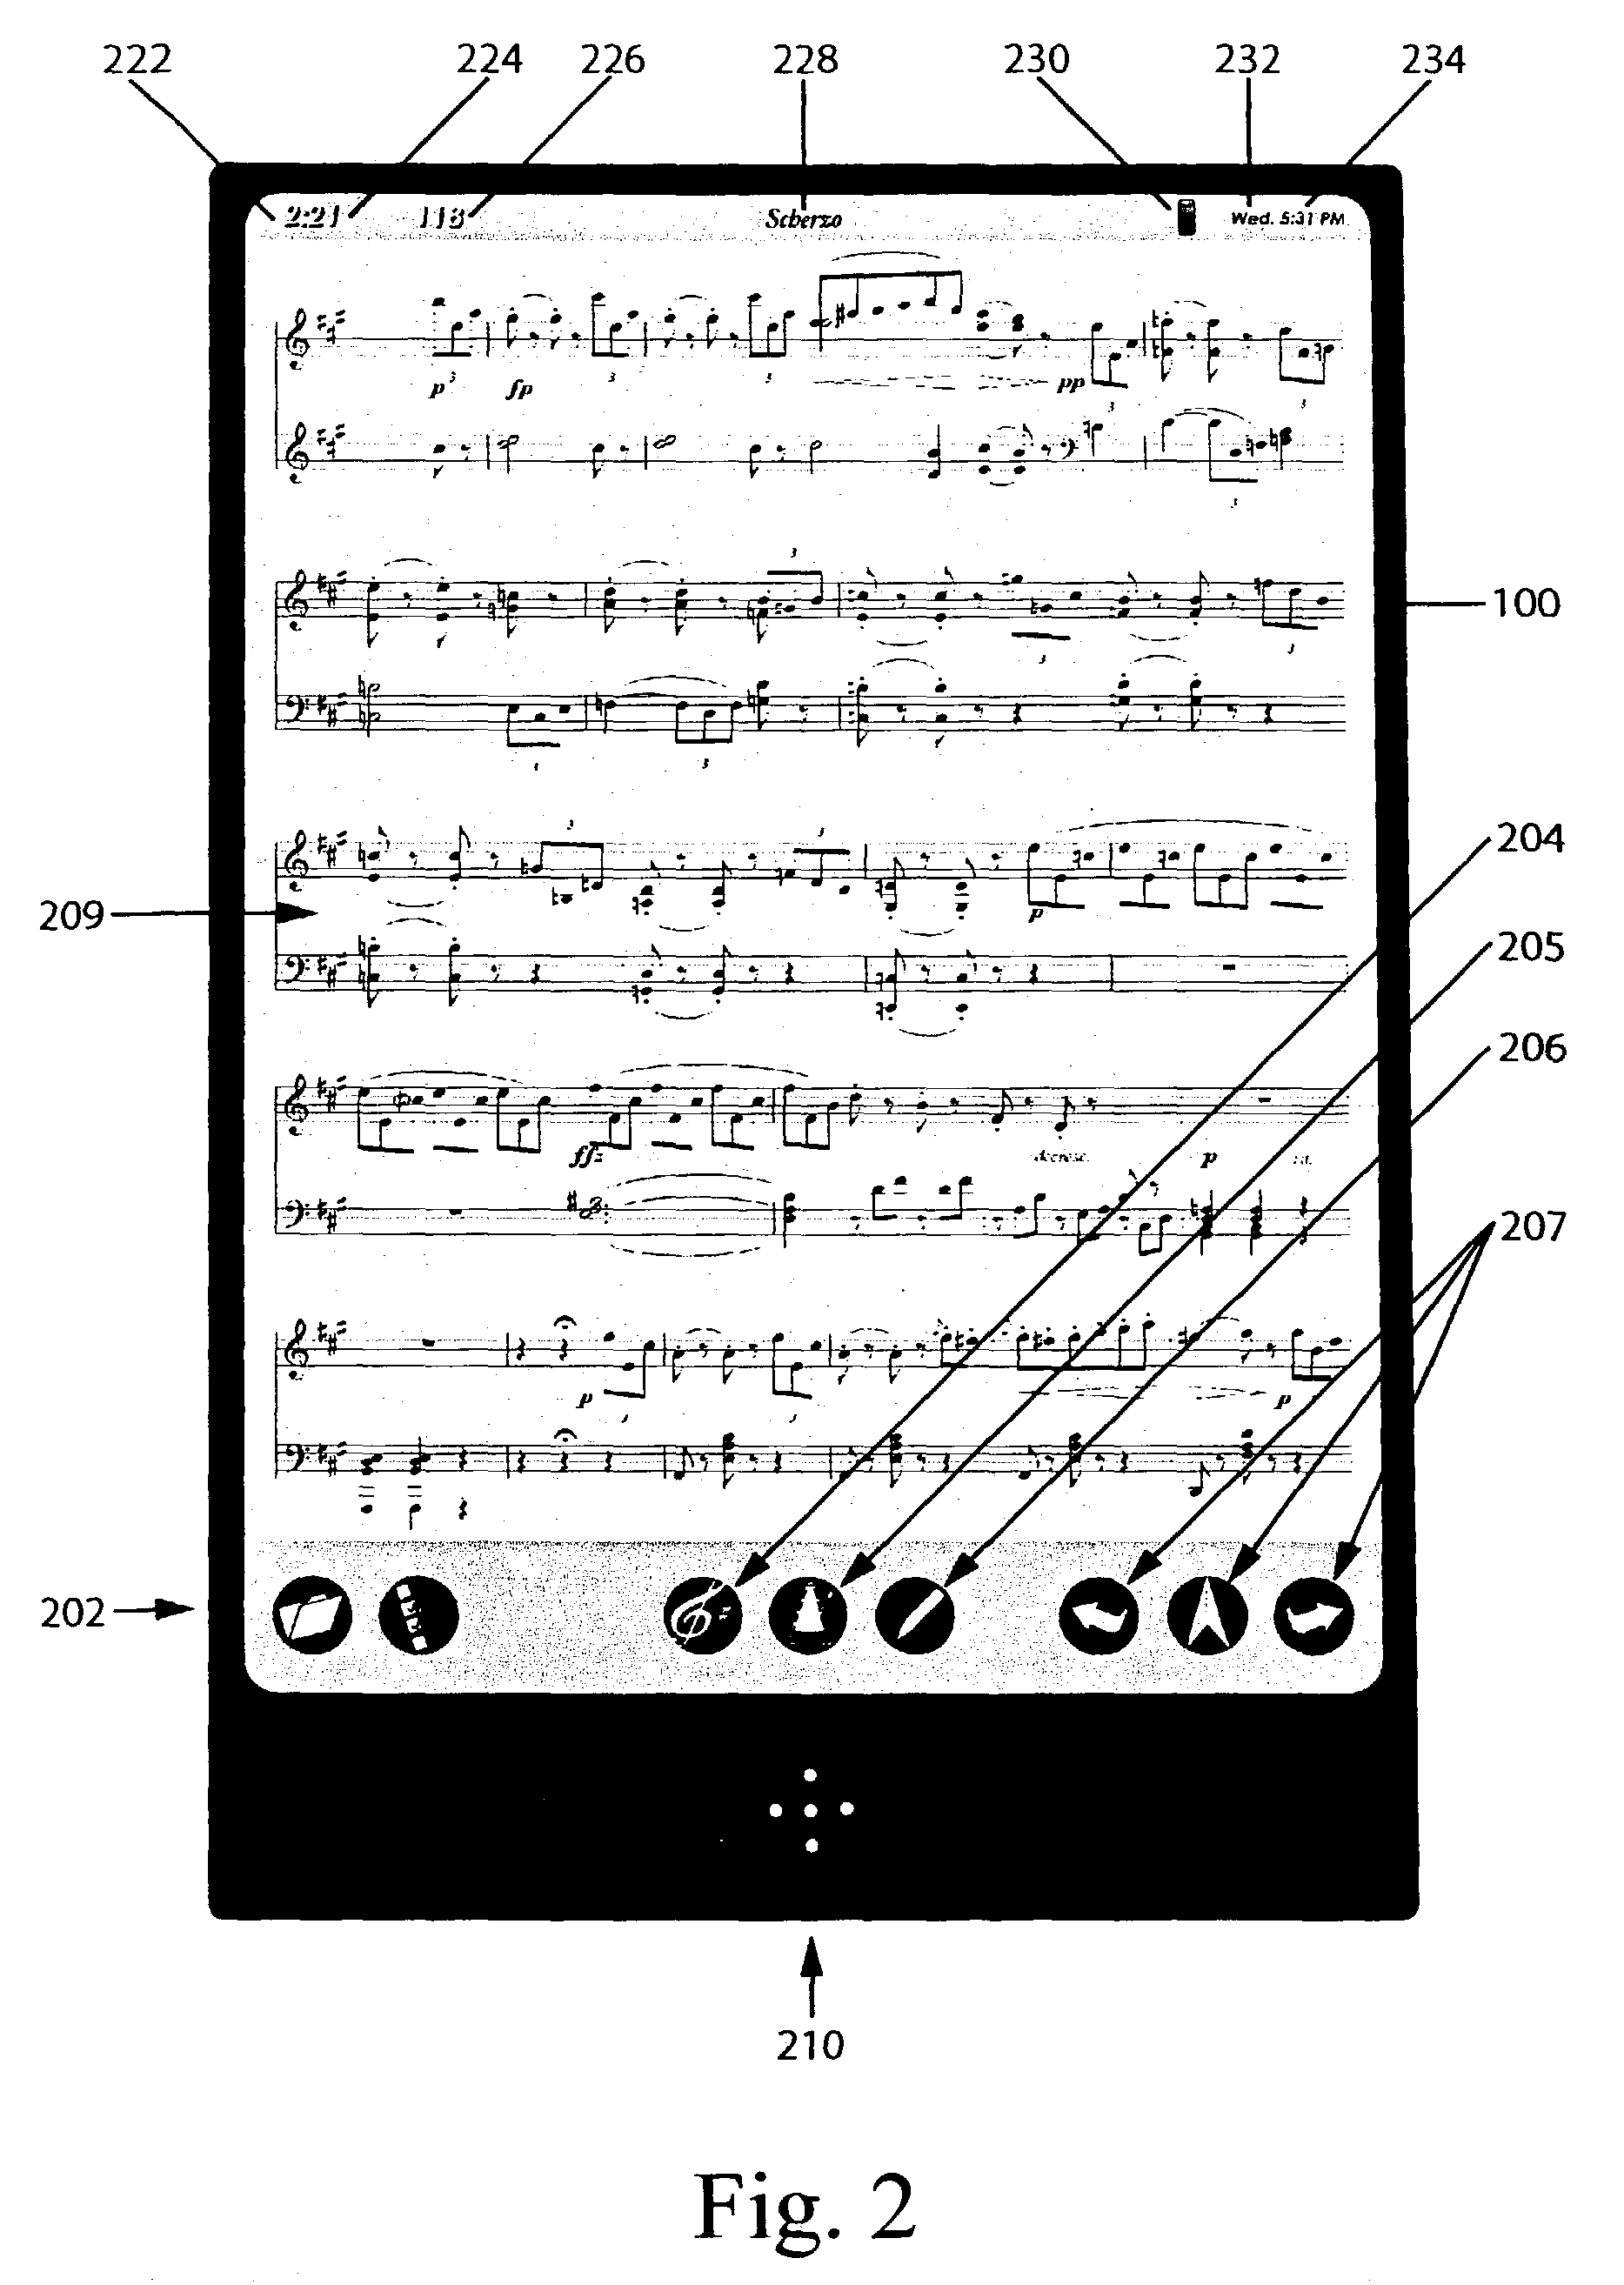 Electronic music display appliance and method for displaying music scores